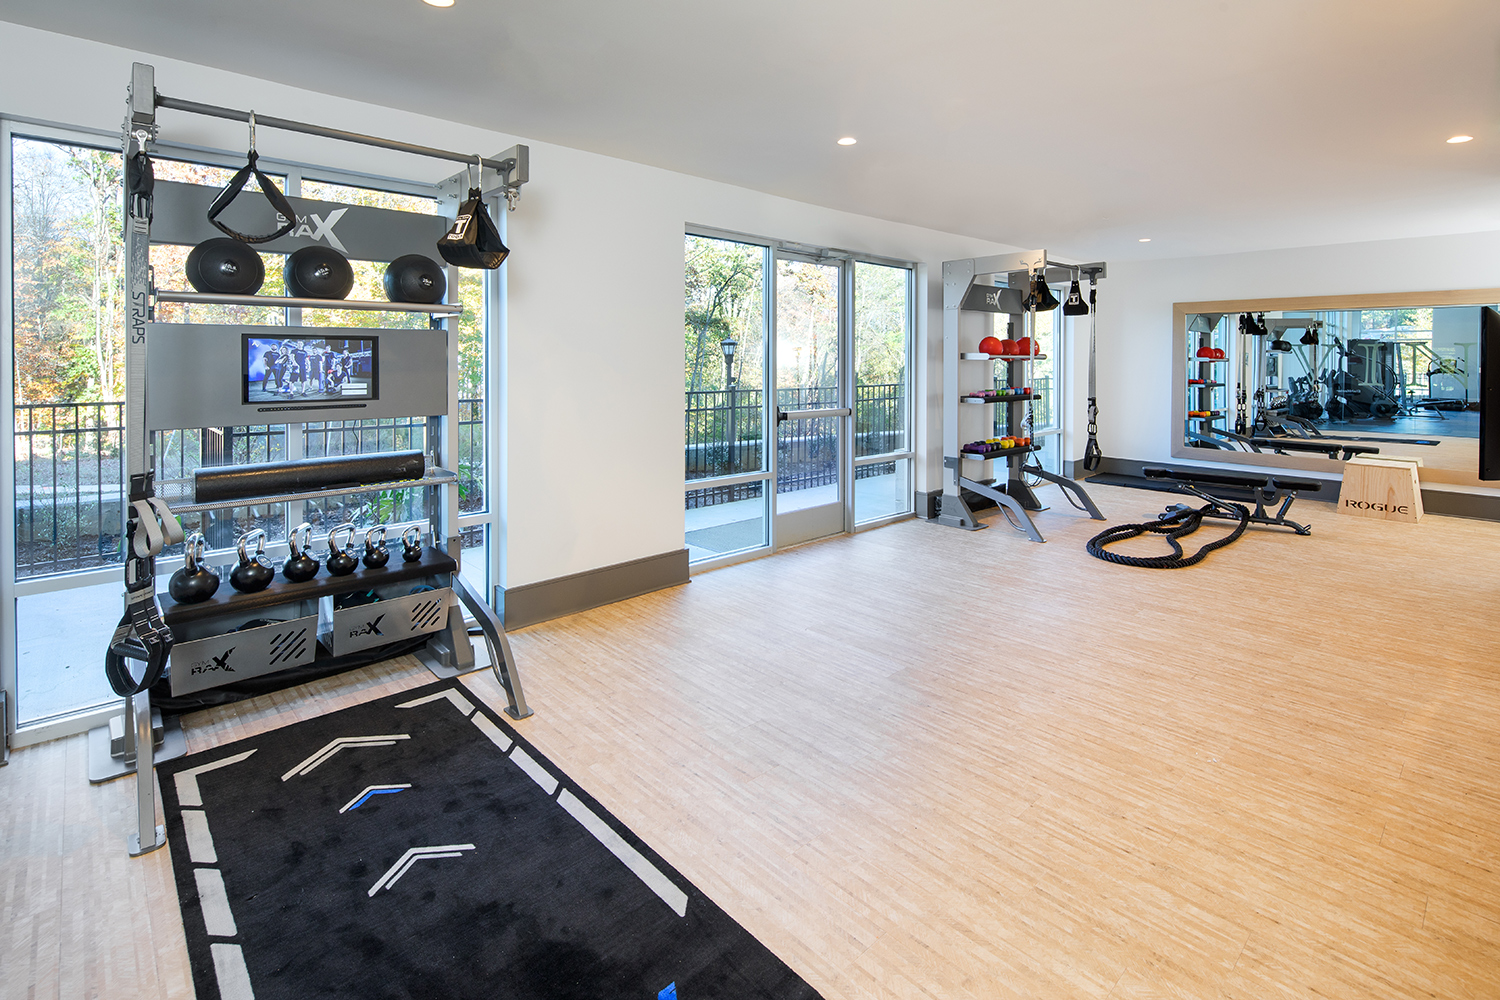 Vine North Hills fitness center with equipment and wooden flooring